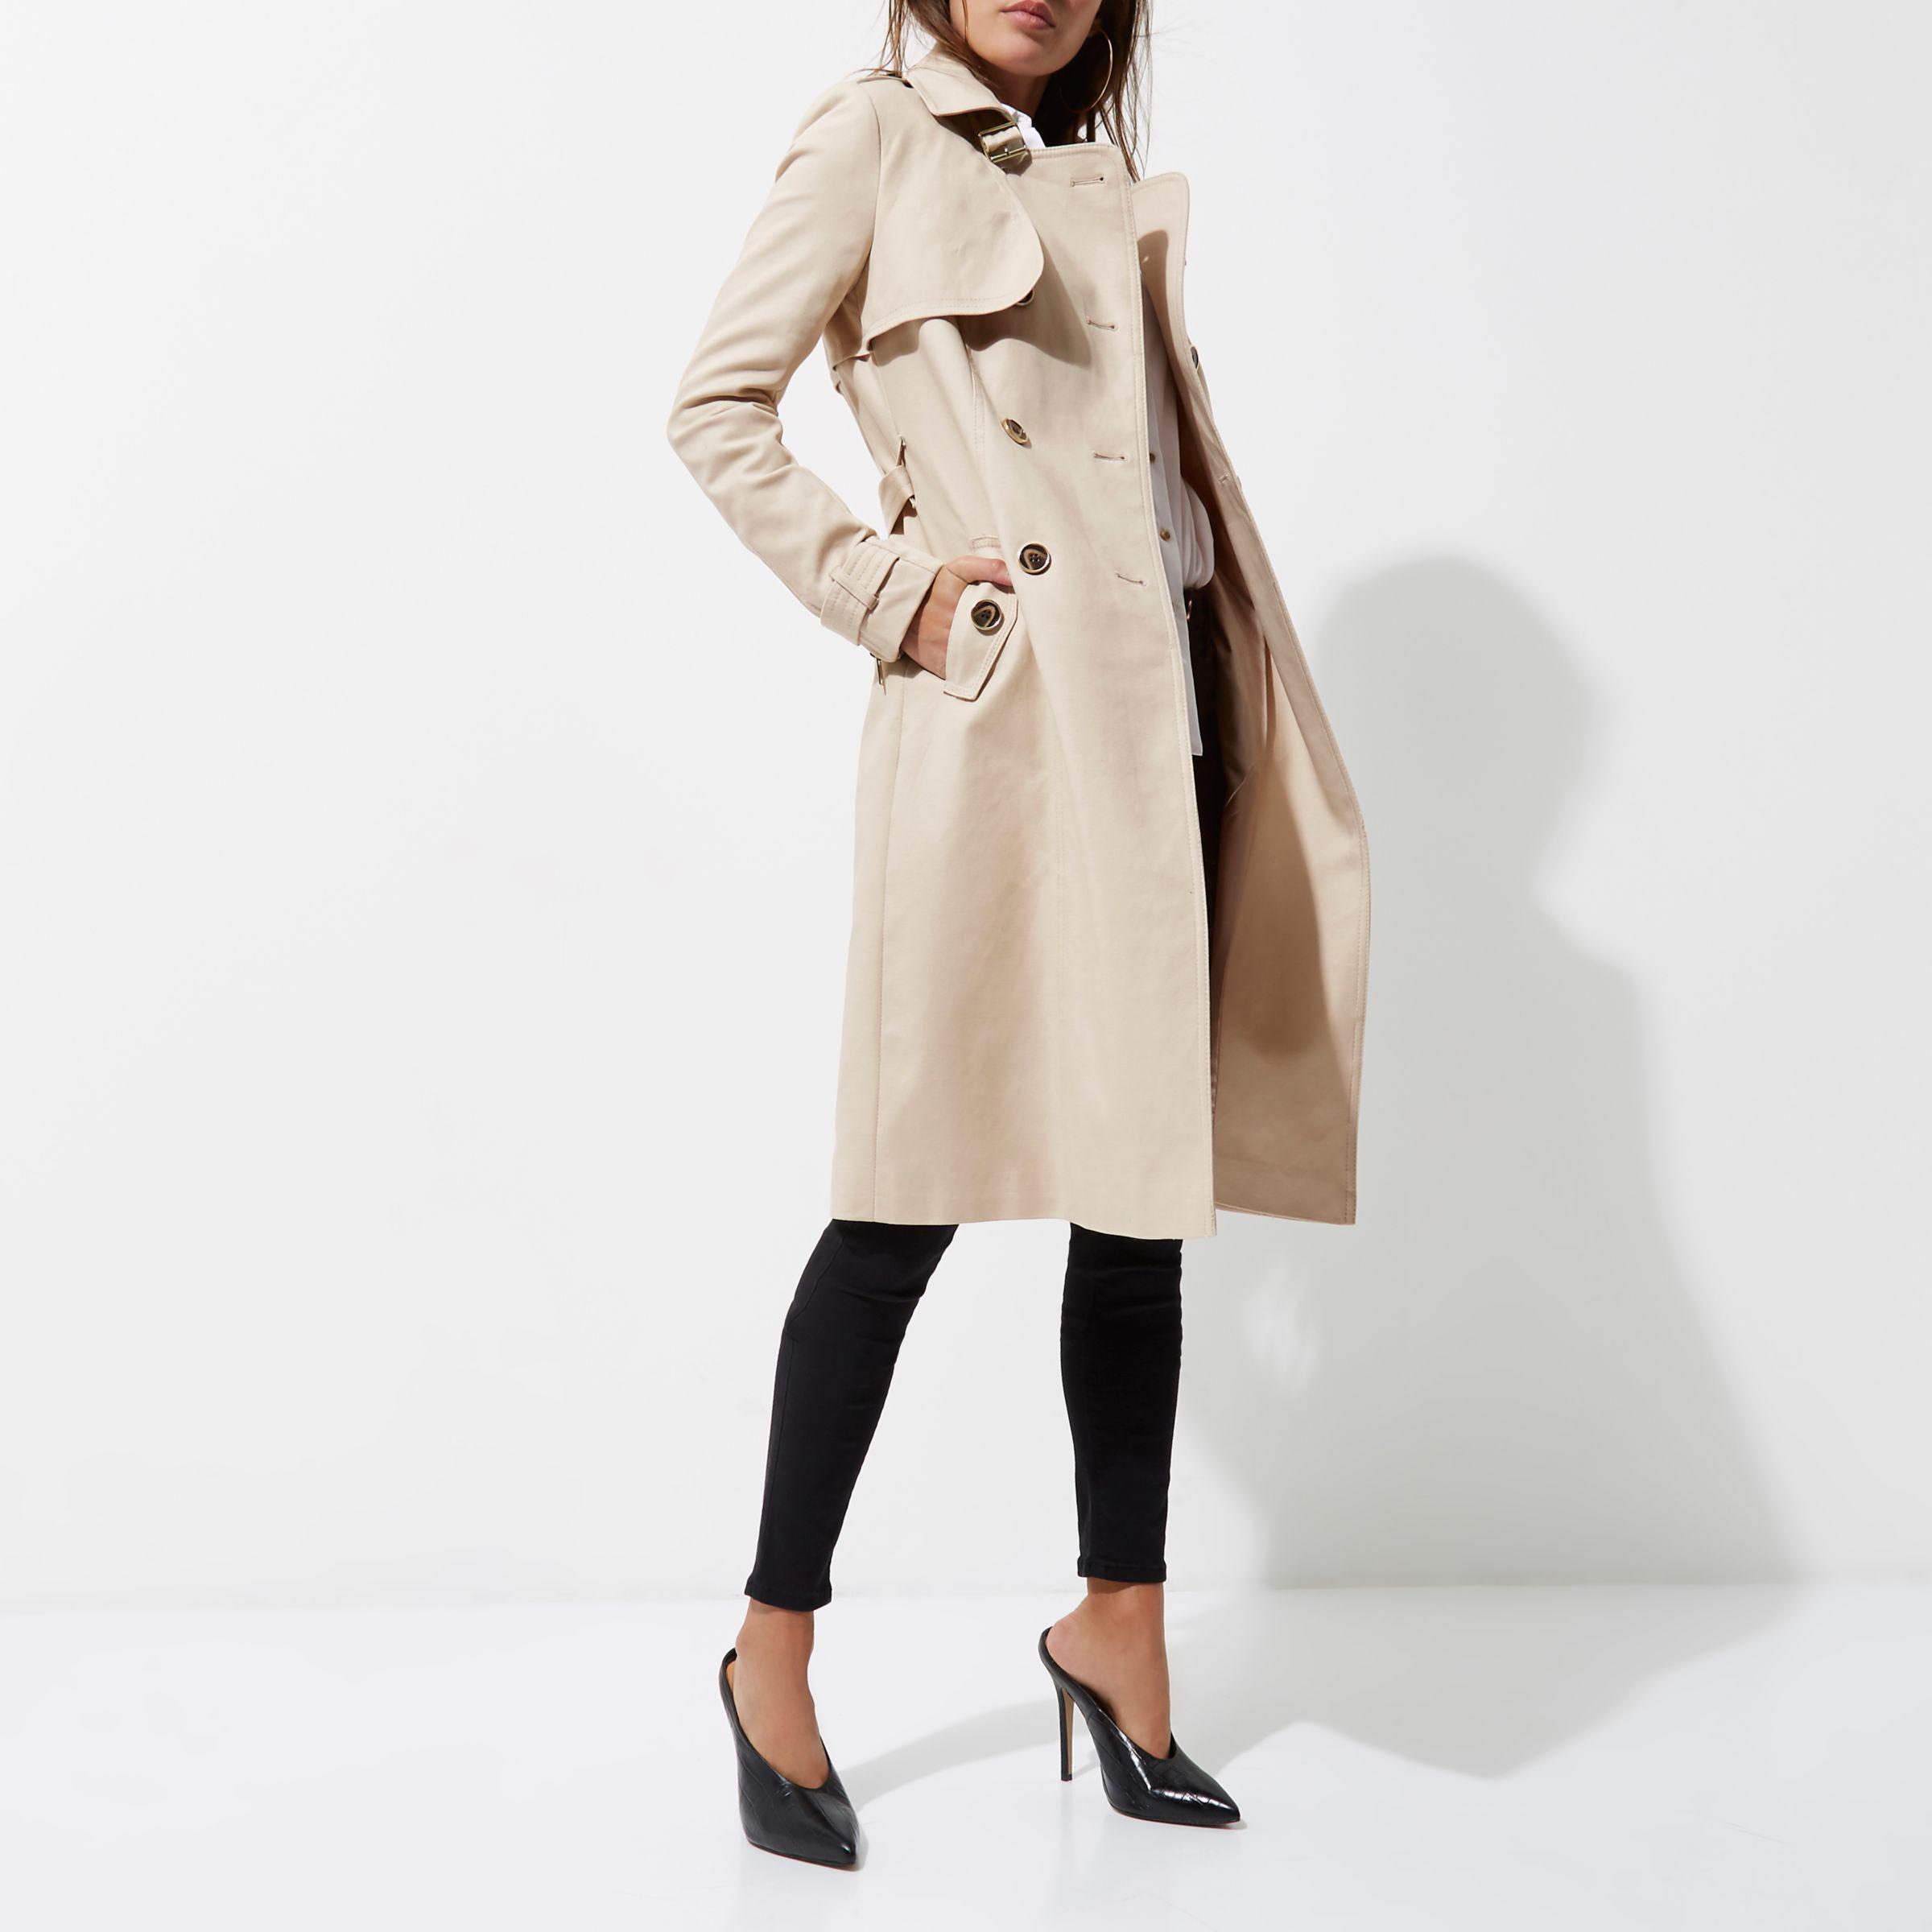 River Island Light Beige Belted Trench Coat in Natural | Lyst